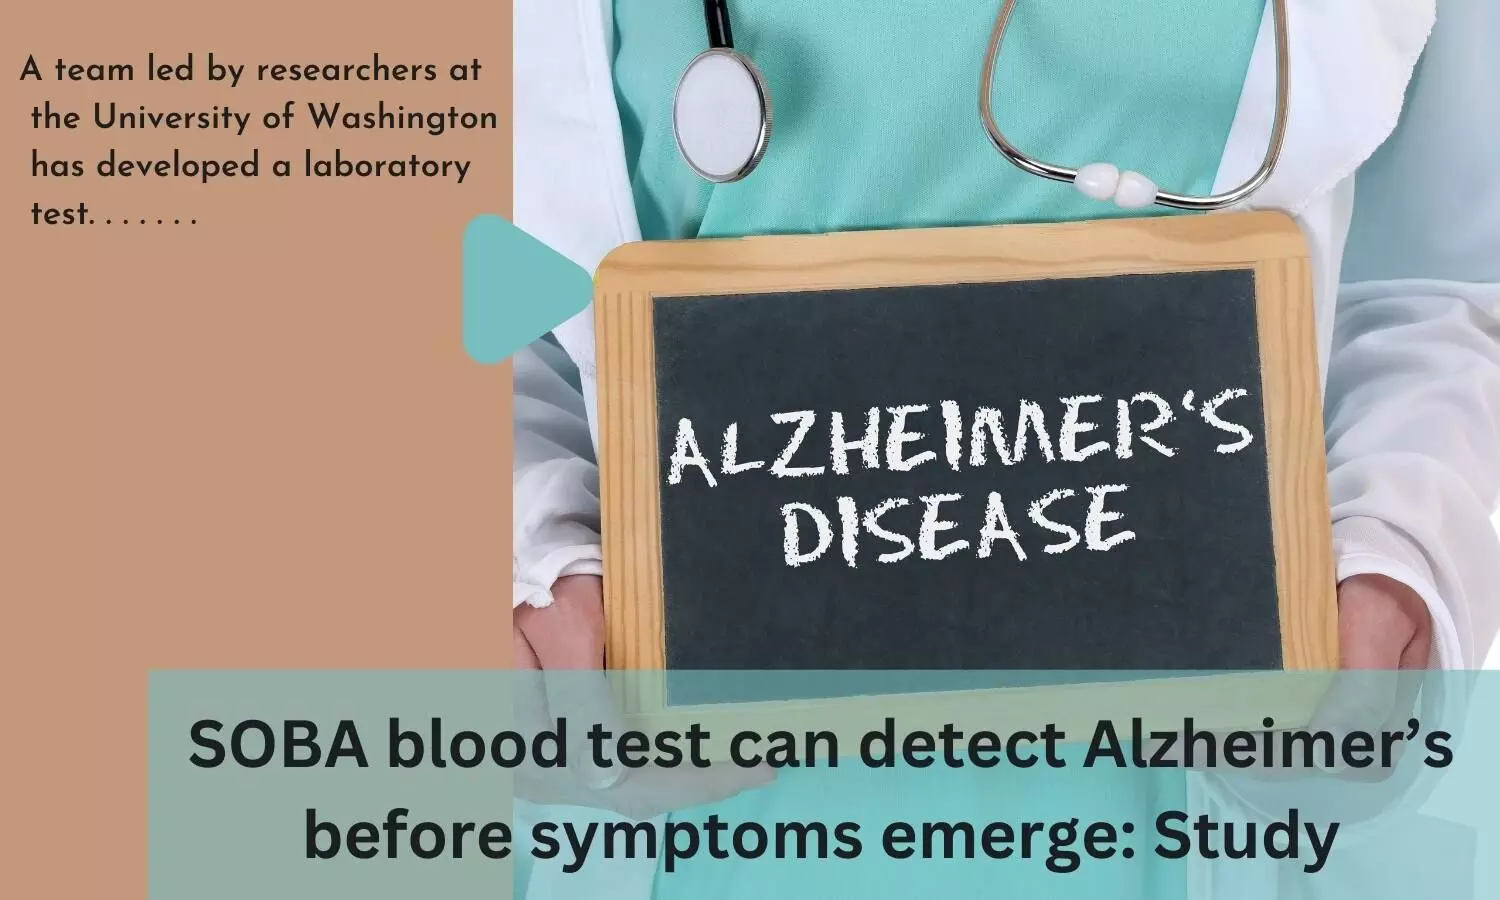 SOBA blood test can detect Alzheimers before symptoms emerge: Study